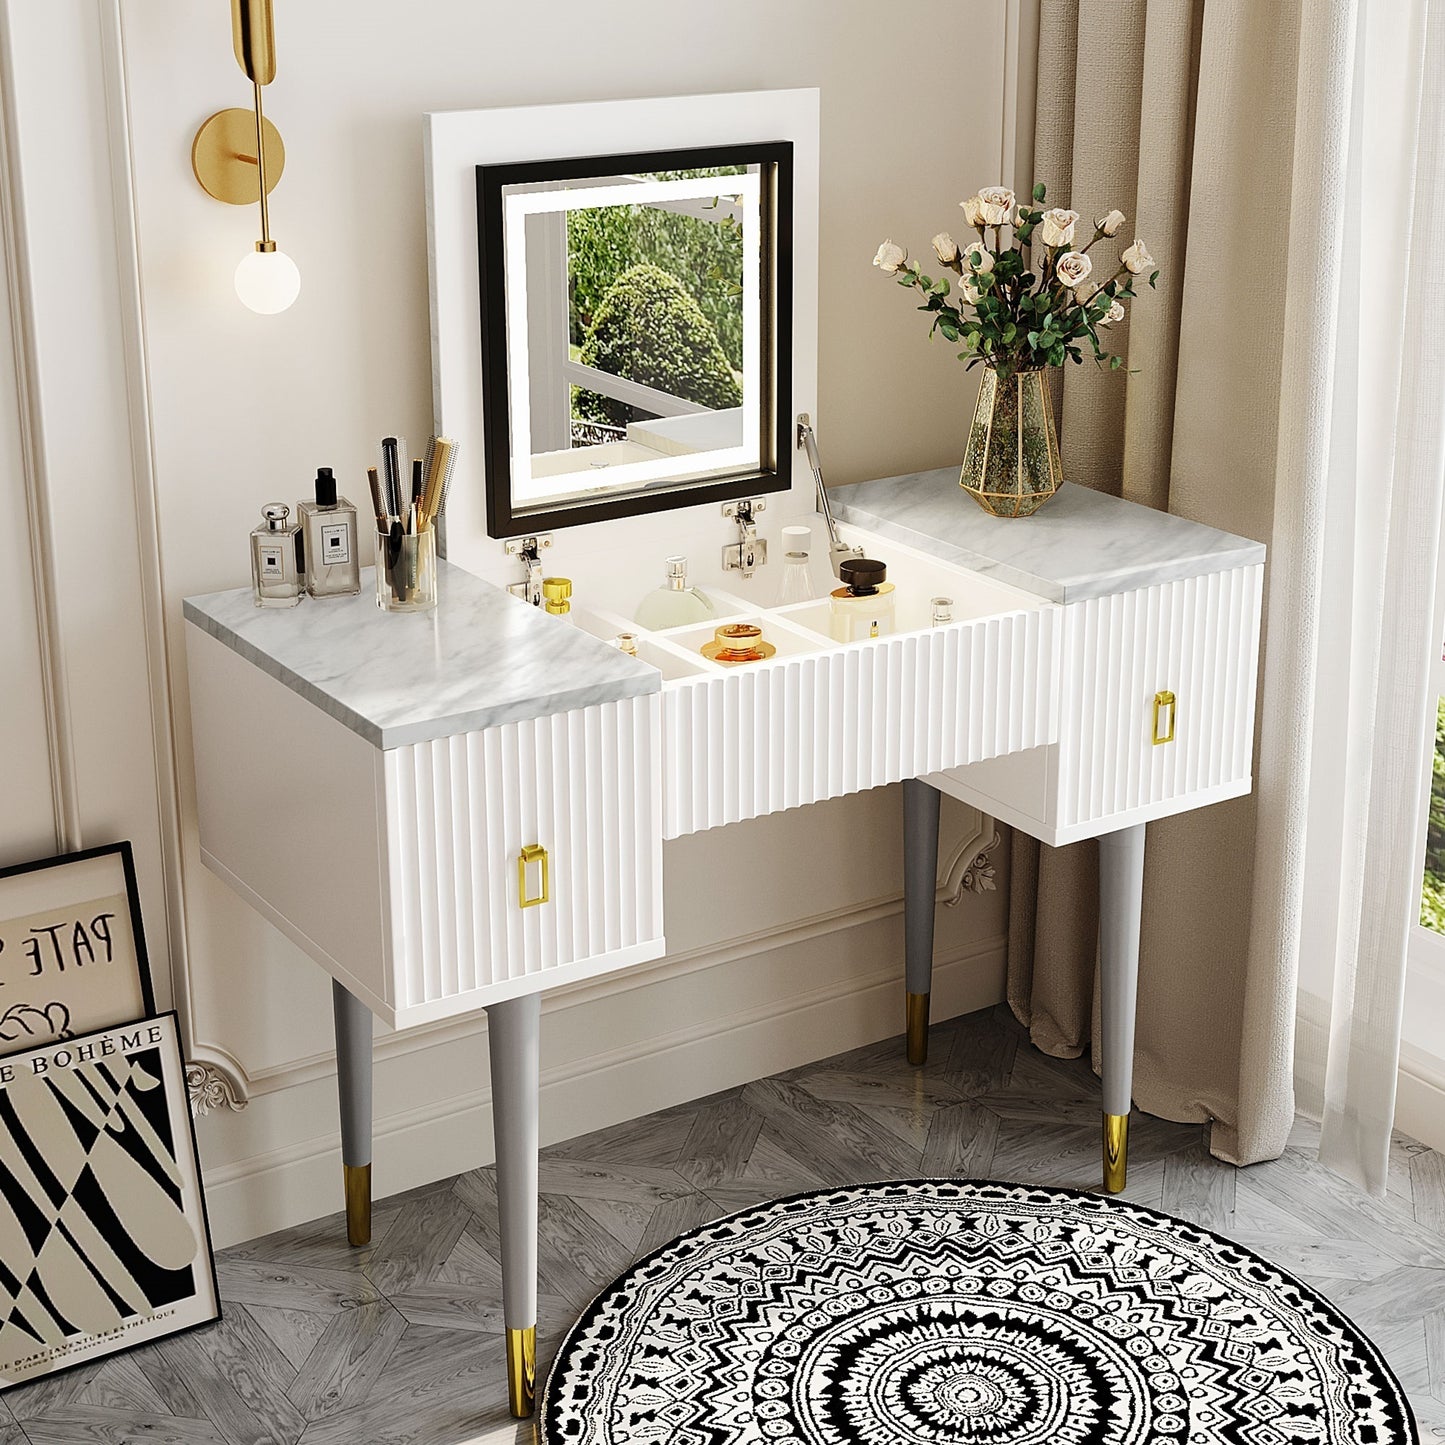 43.3" Modern Vanity Table Set with Flip-top Mirror and LED Light, Dressing Table with Customizable Storage, Marble-style Stickers Tabletop, White and Gray